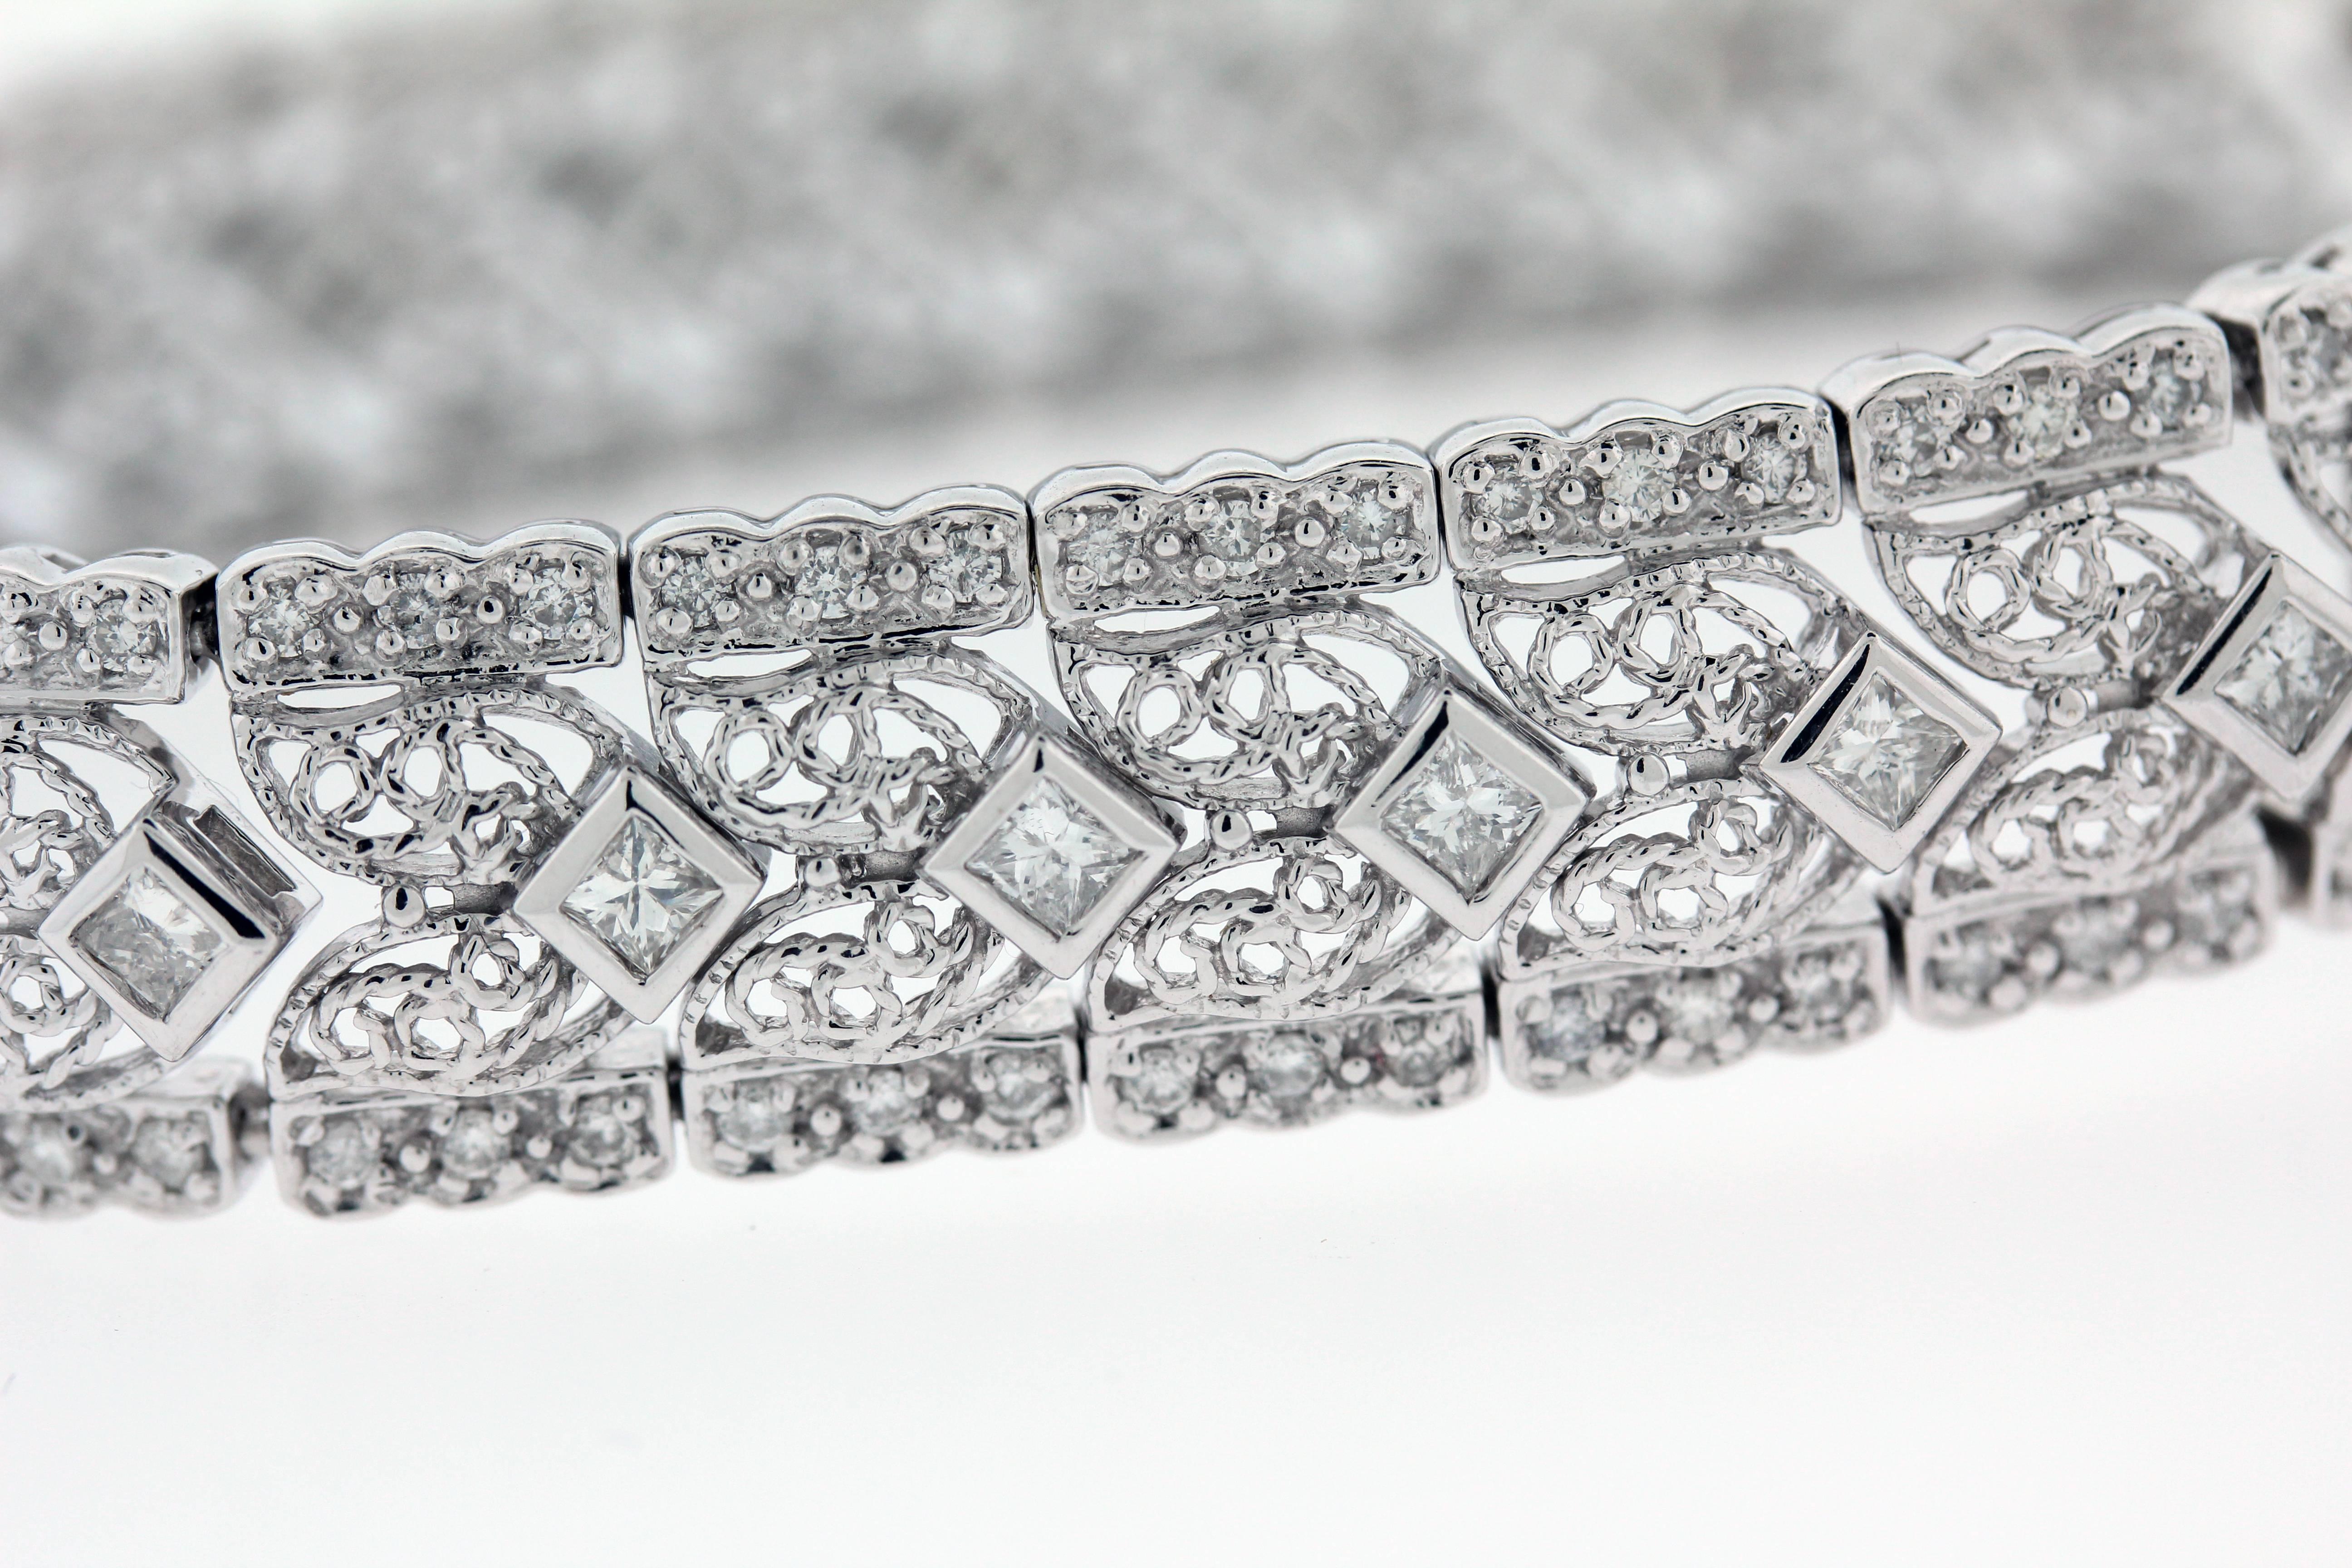 14K White Gold Open Work Bracelet with Round and Princess Cut Diamonds

3.70ct. apprx. Round and Princess Cut Diamonds make up the entire bracelet.

Gorgeous design is seen throughout piece, with open work sections.

Bracelet is 7 inches in length x